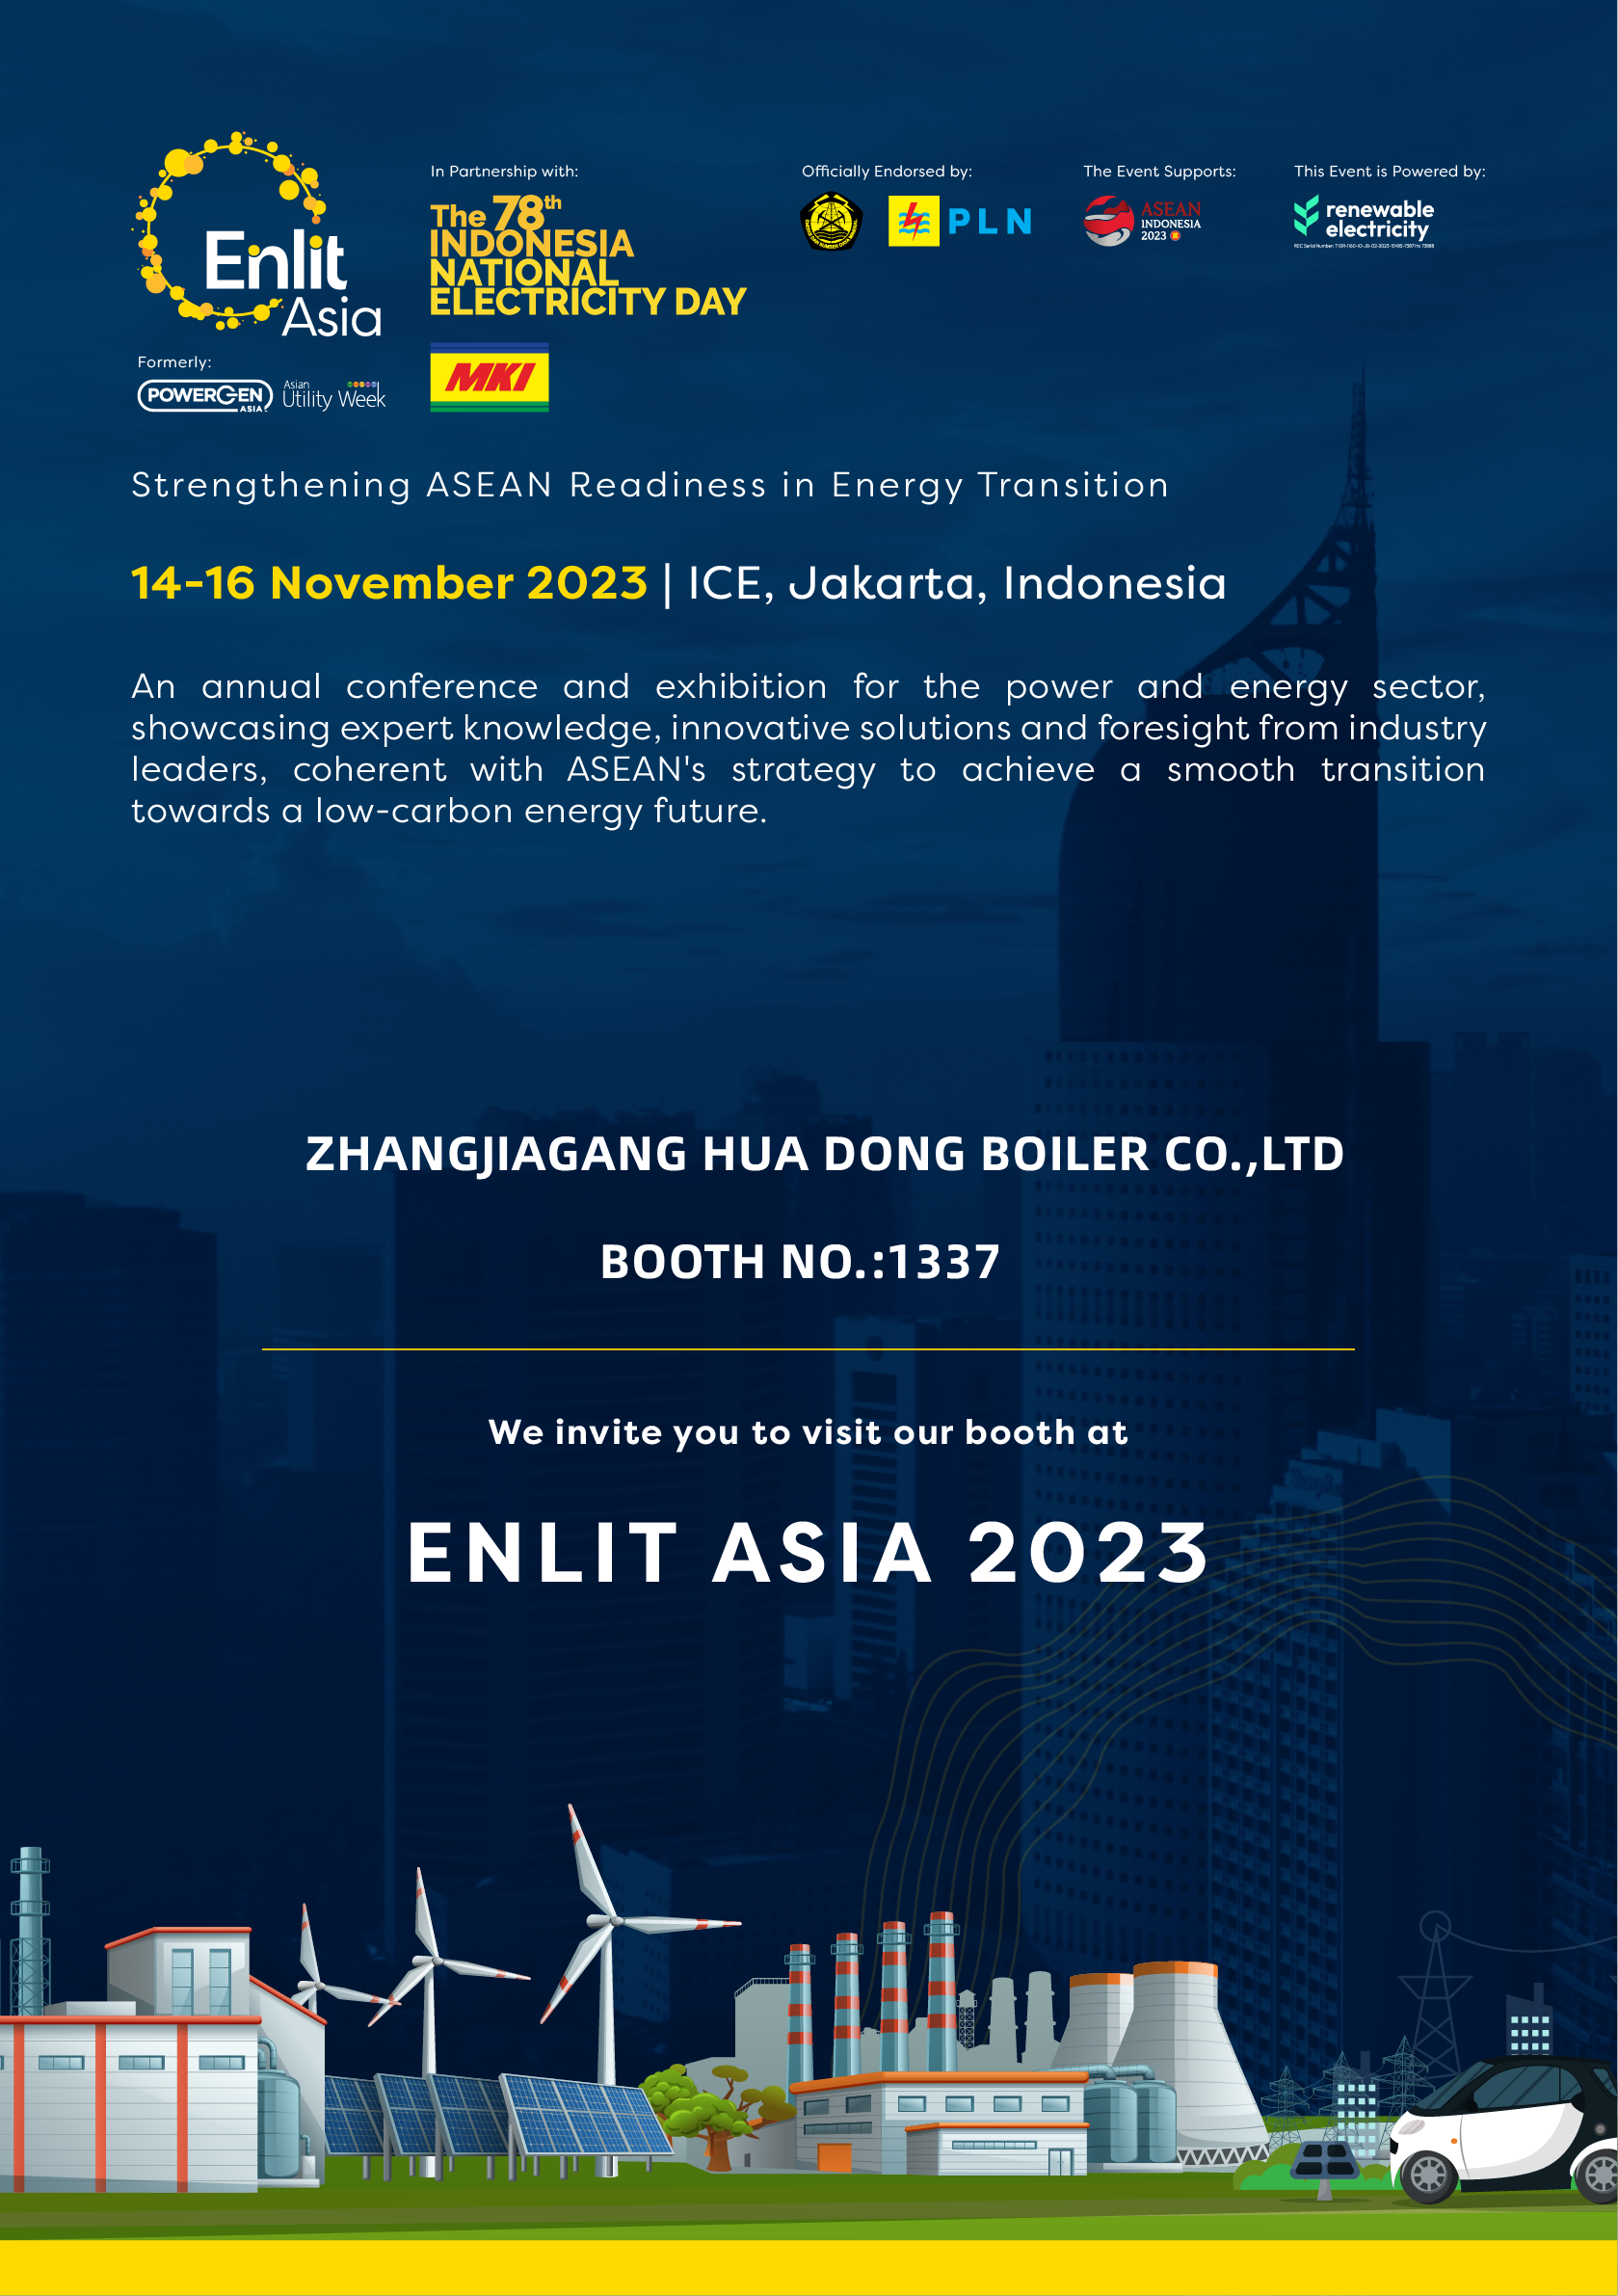 We are at ENLIT ASIA 2023!